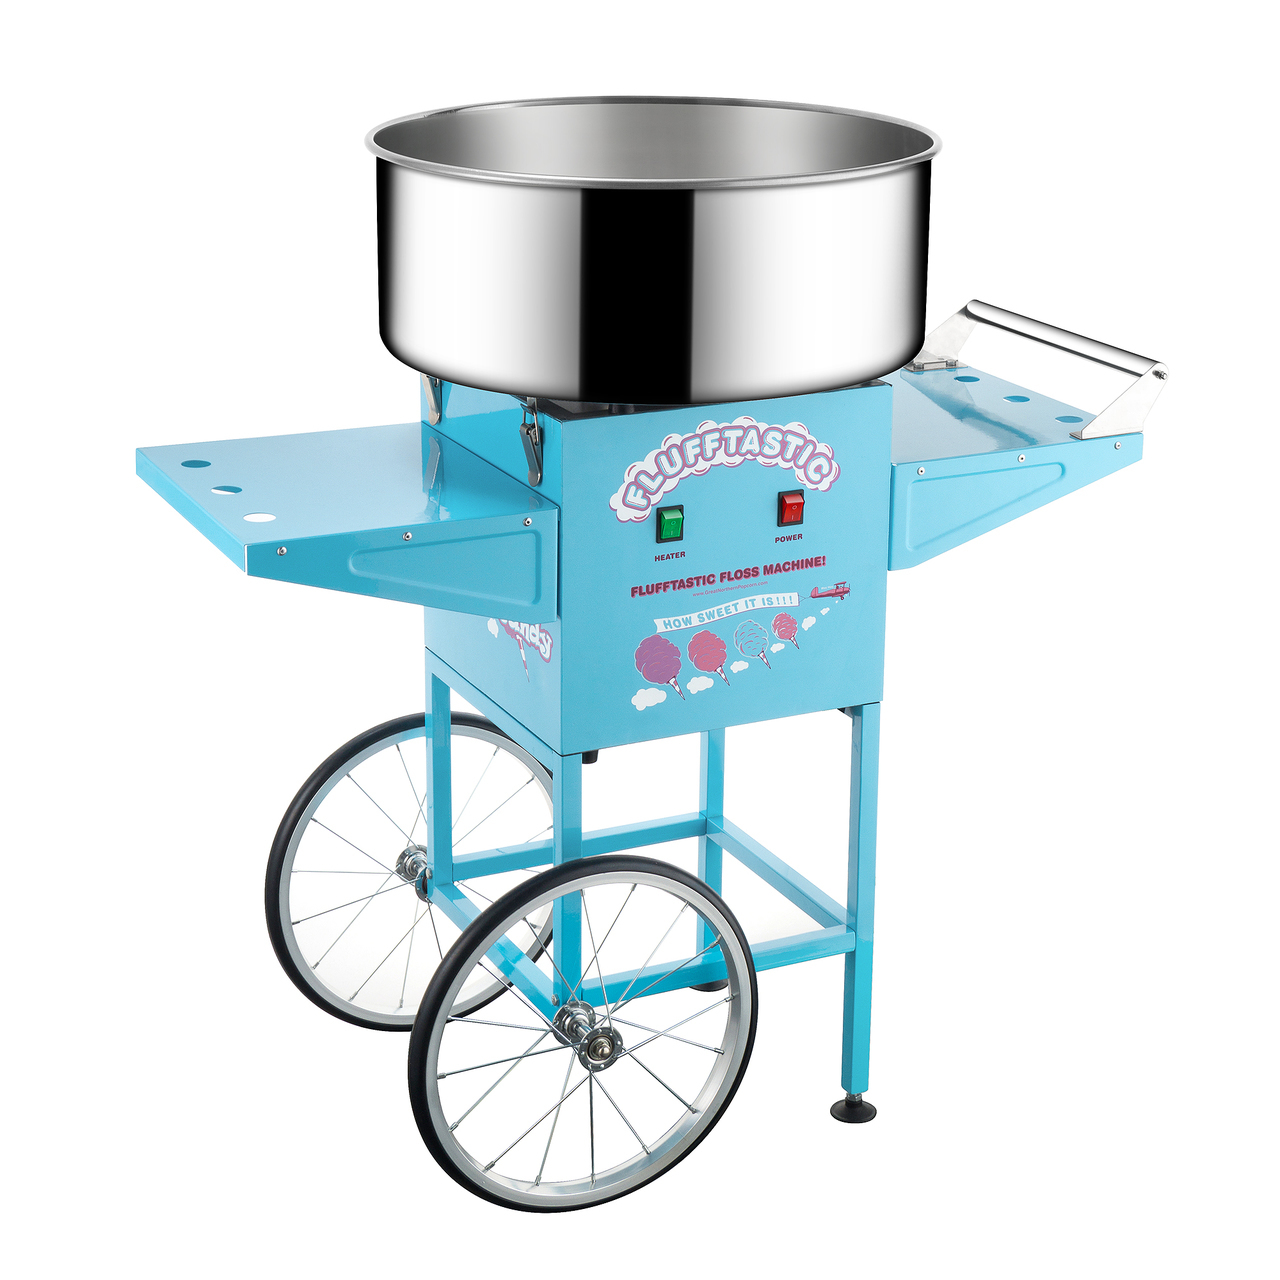 Cotton Candy - Cotton Candy Machines - Great Northern Popcorn